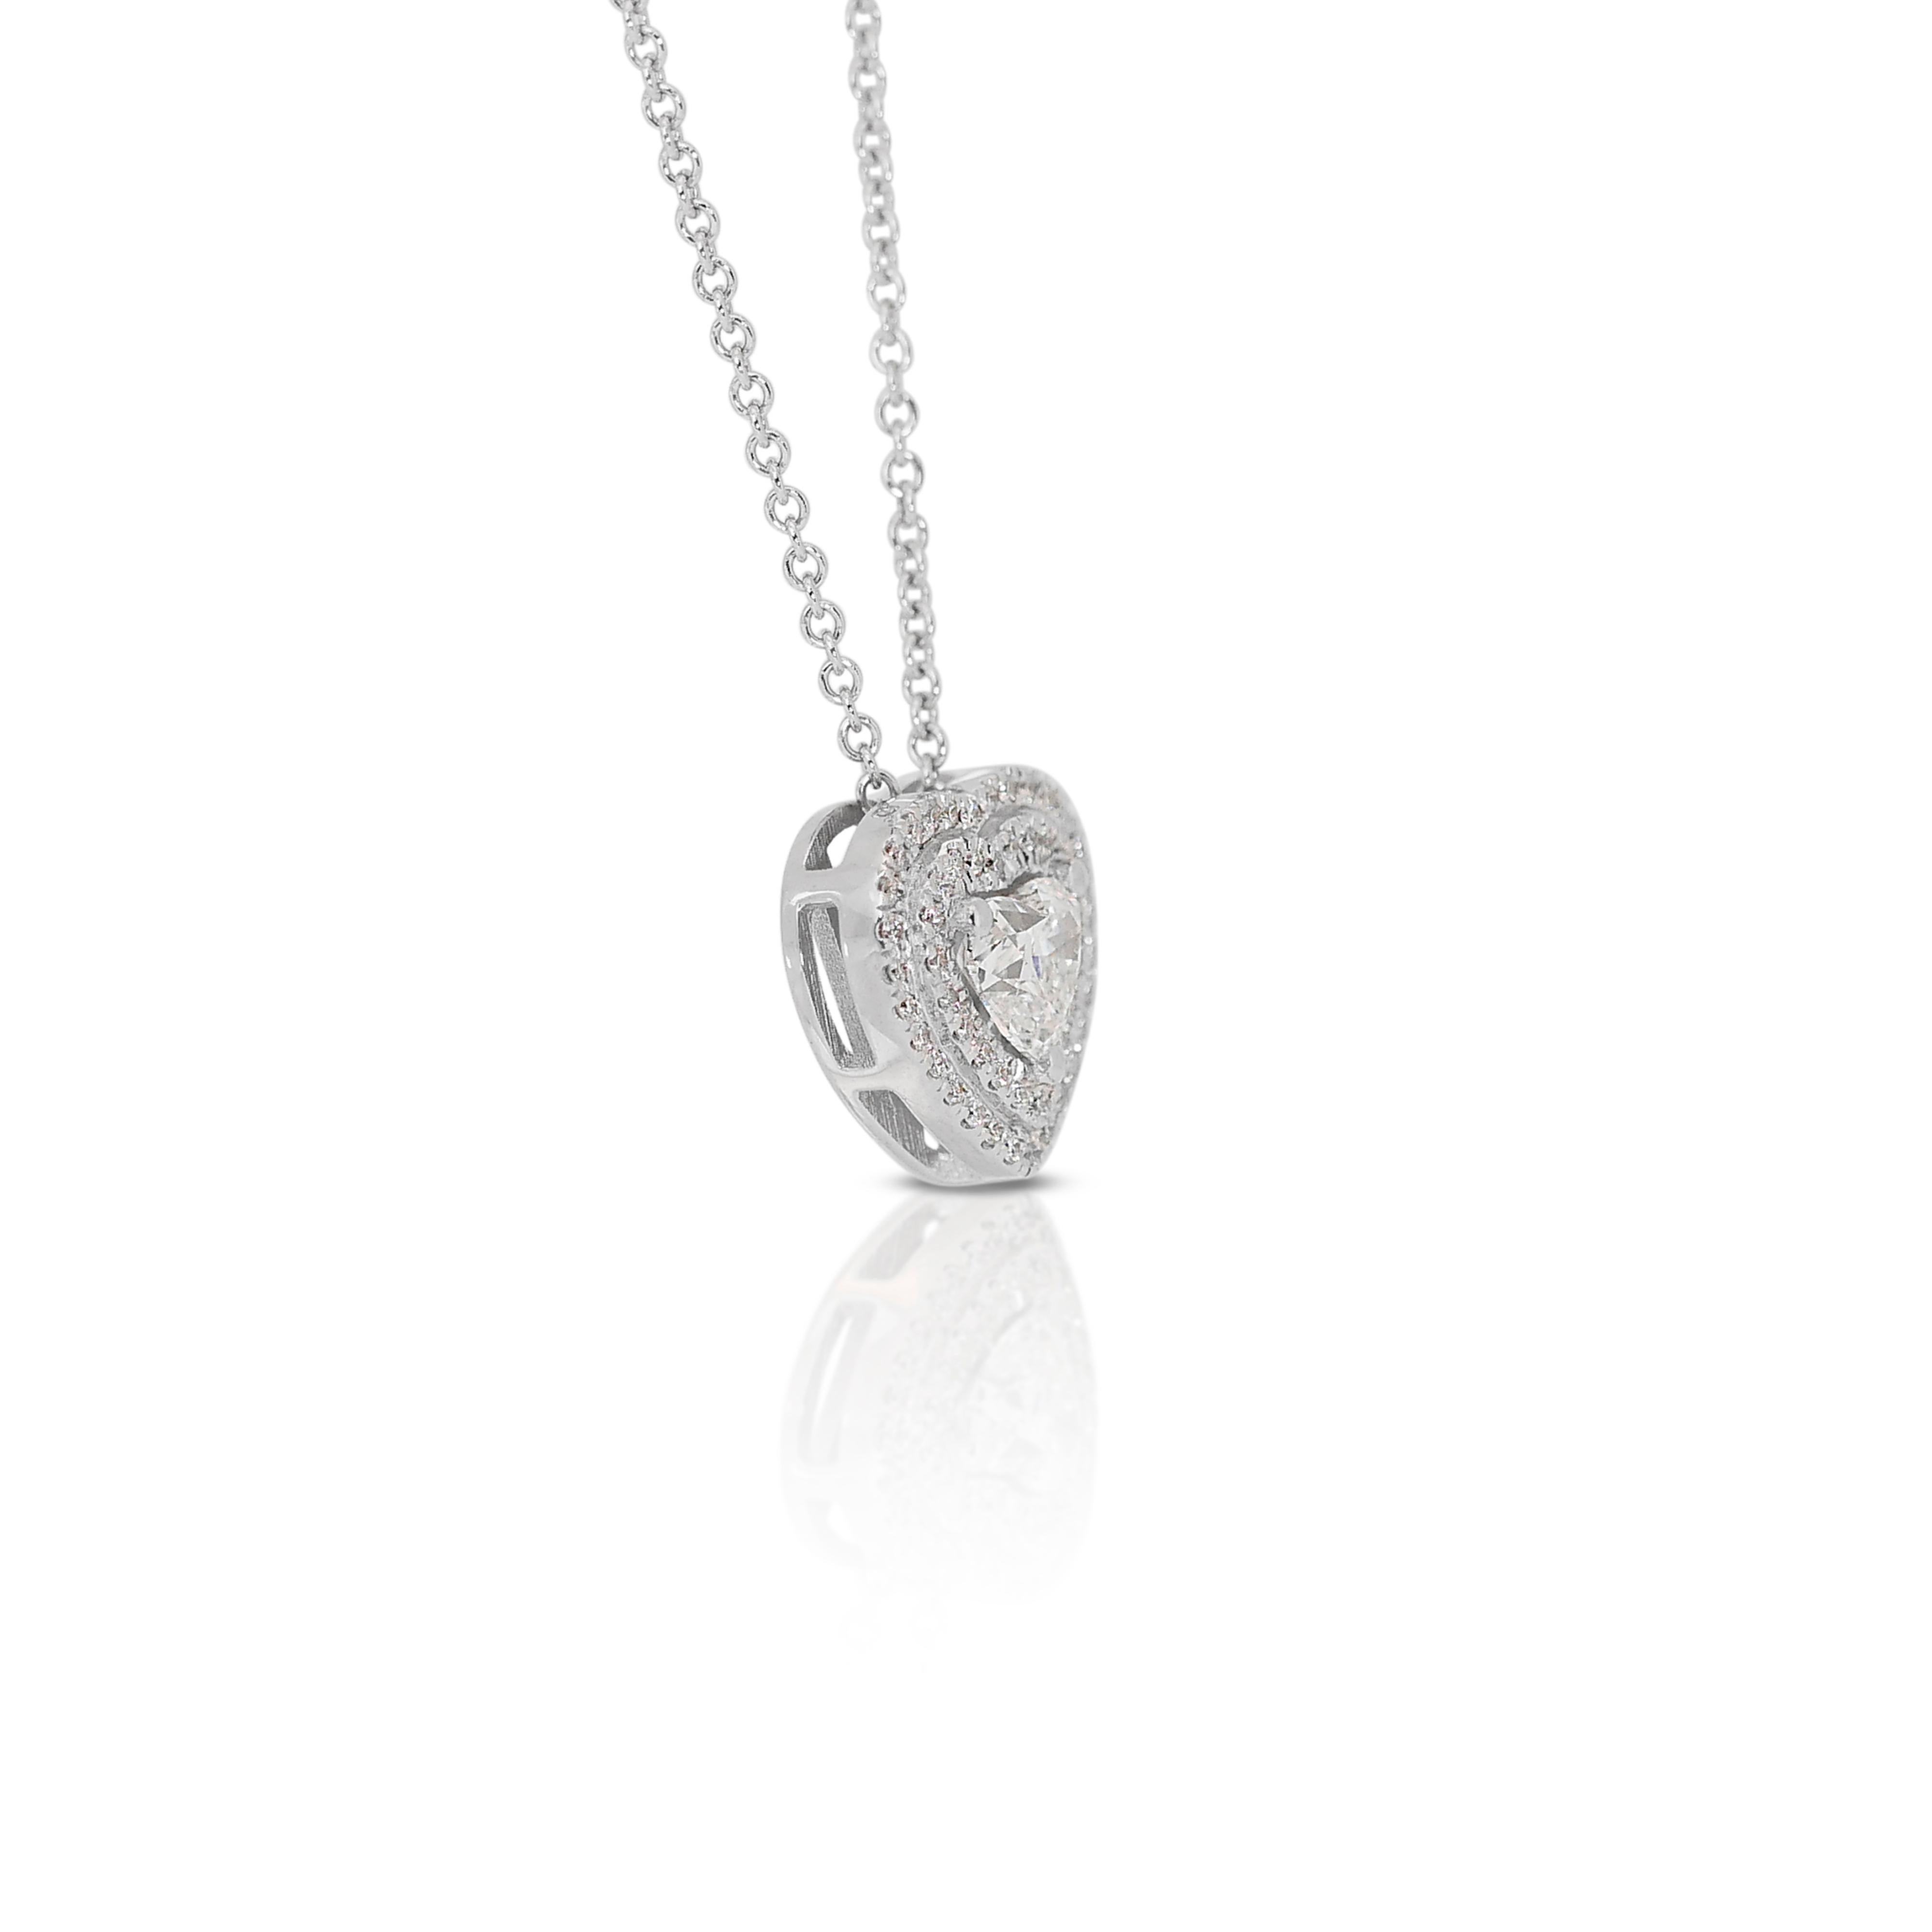 Elegant 0.80ct Heart-Shaped Diamond Halo Necklace in 18k White Gold - GIA Certified

Indulge in the timeless beauty of this 18k white gold halo necklace, featuring a stunning heart-shaped diamond as the centerpiece. The center stone is a 0.50-carat